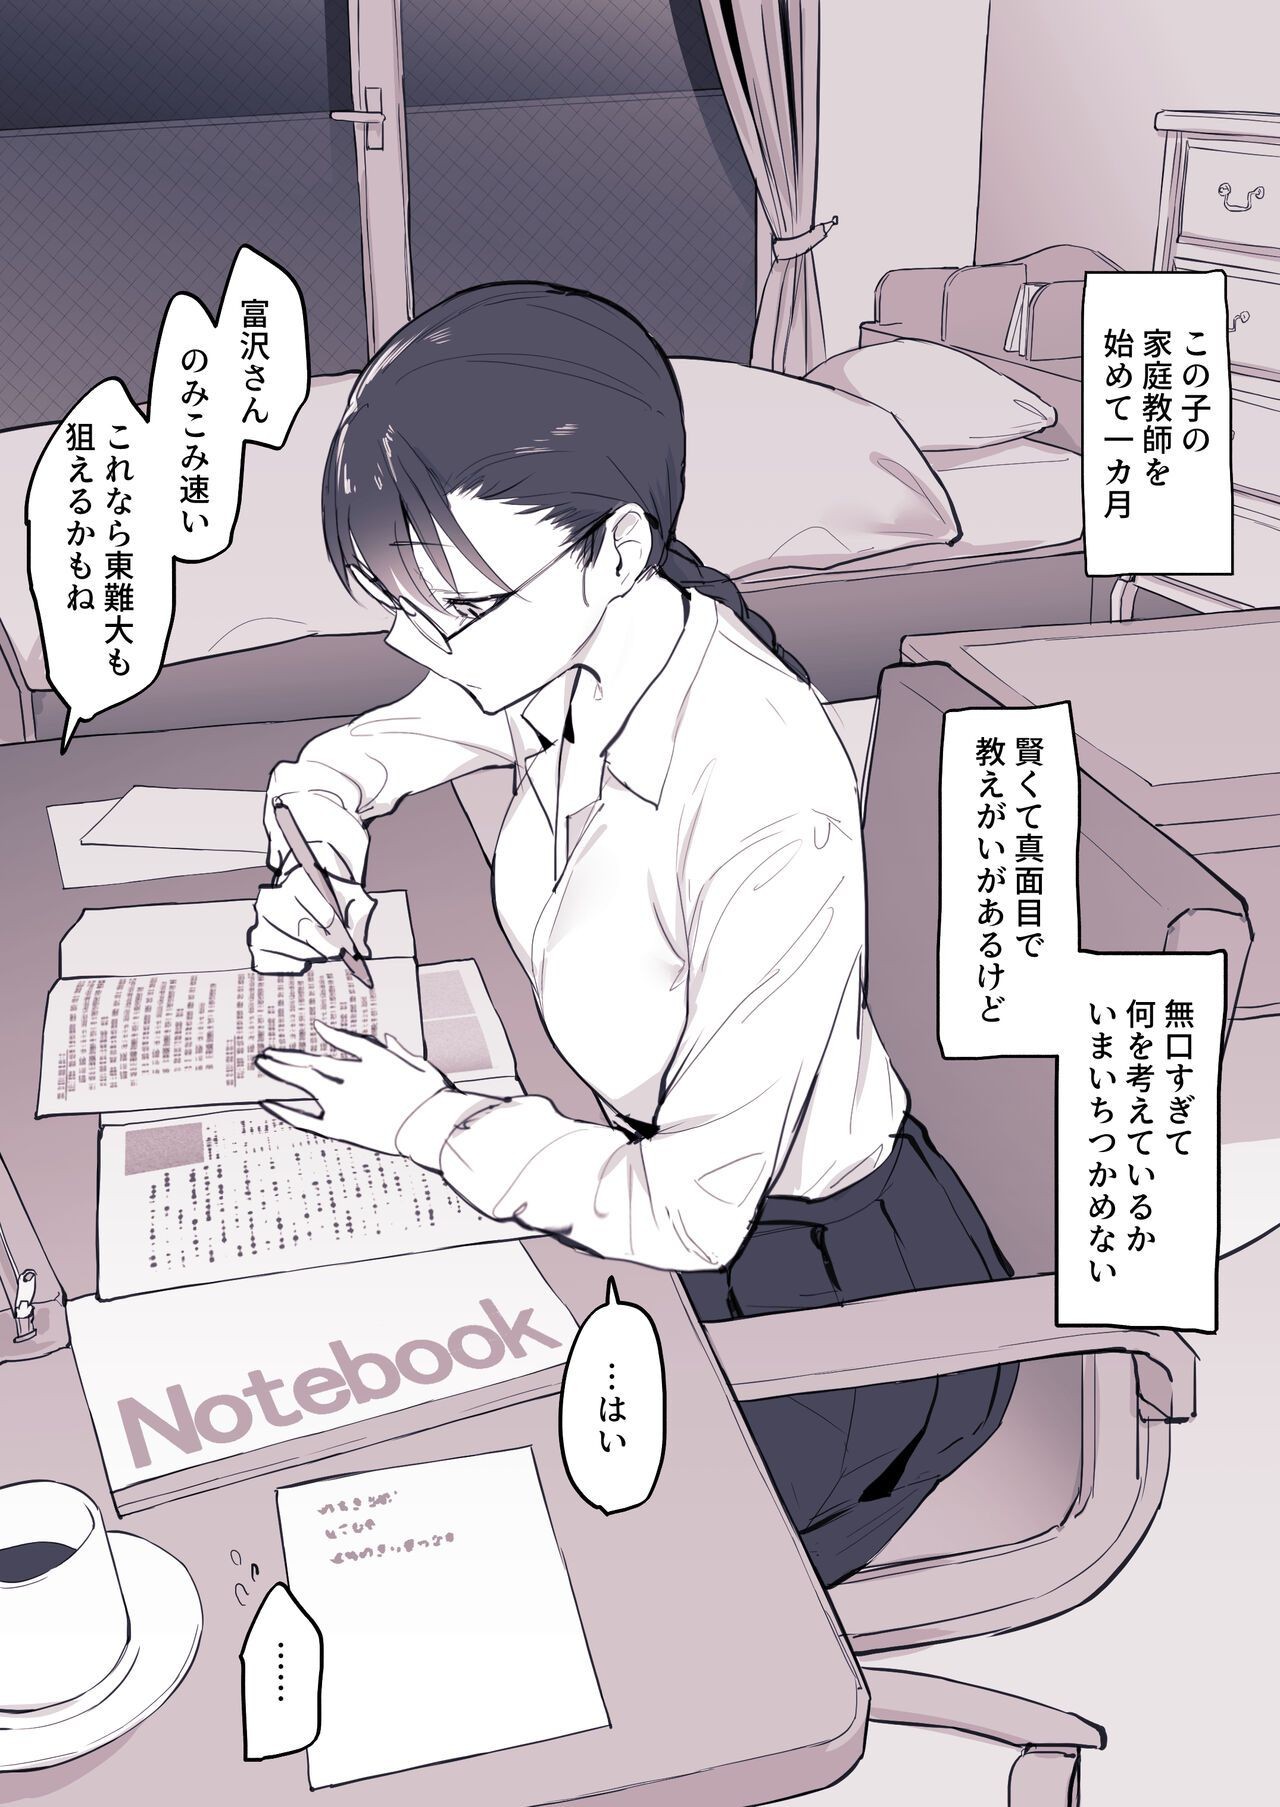 Hidden 【Image】JK, Who Is Teaching At A Private Tutor, "Is A Teacher A Child, What Kind Of Person Is The Type?" Toy